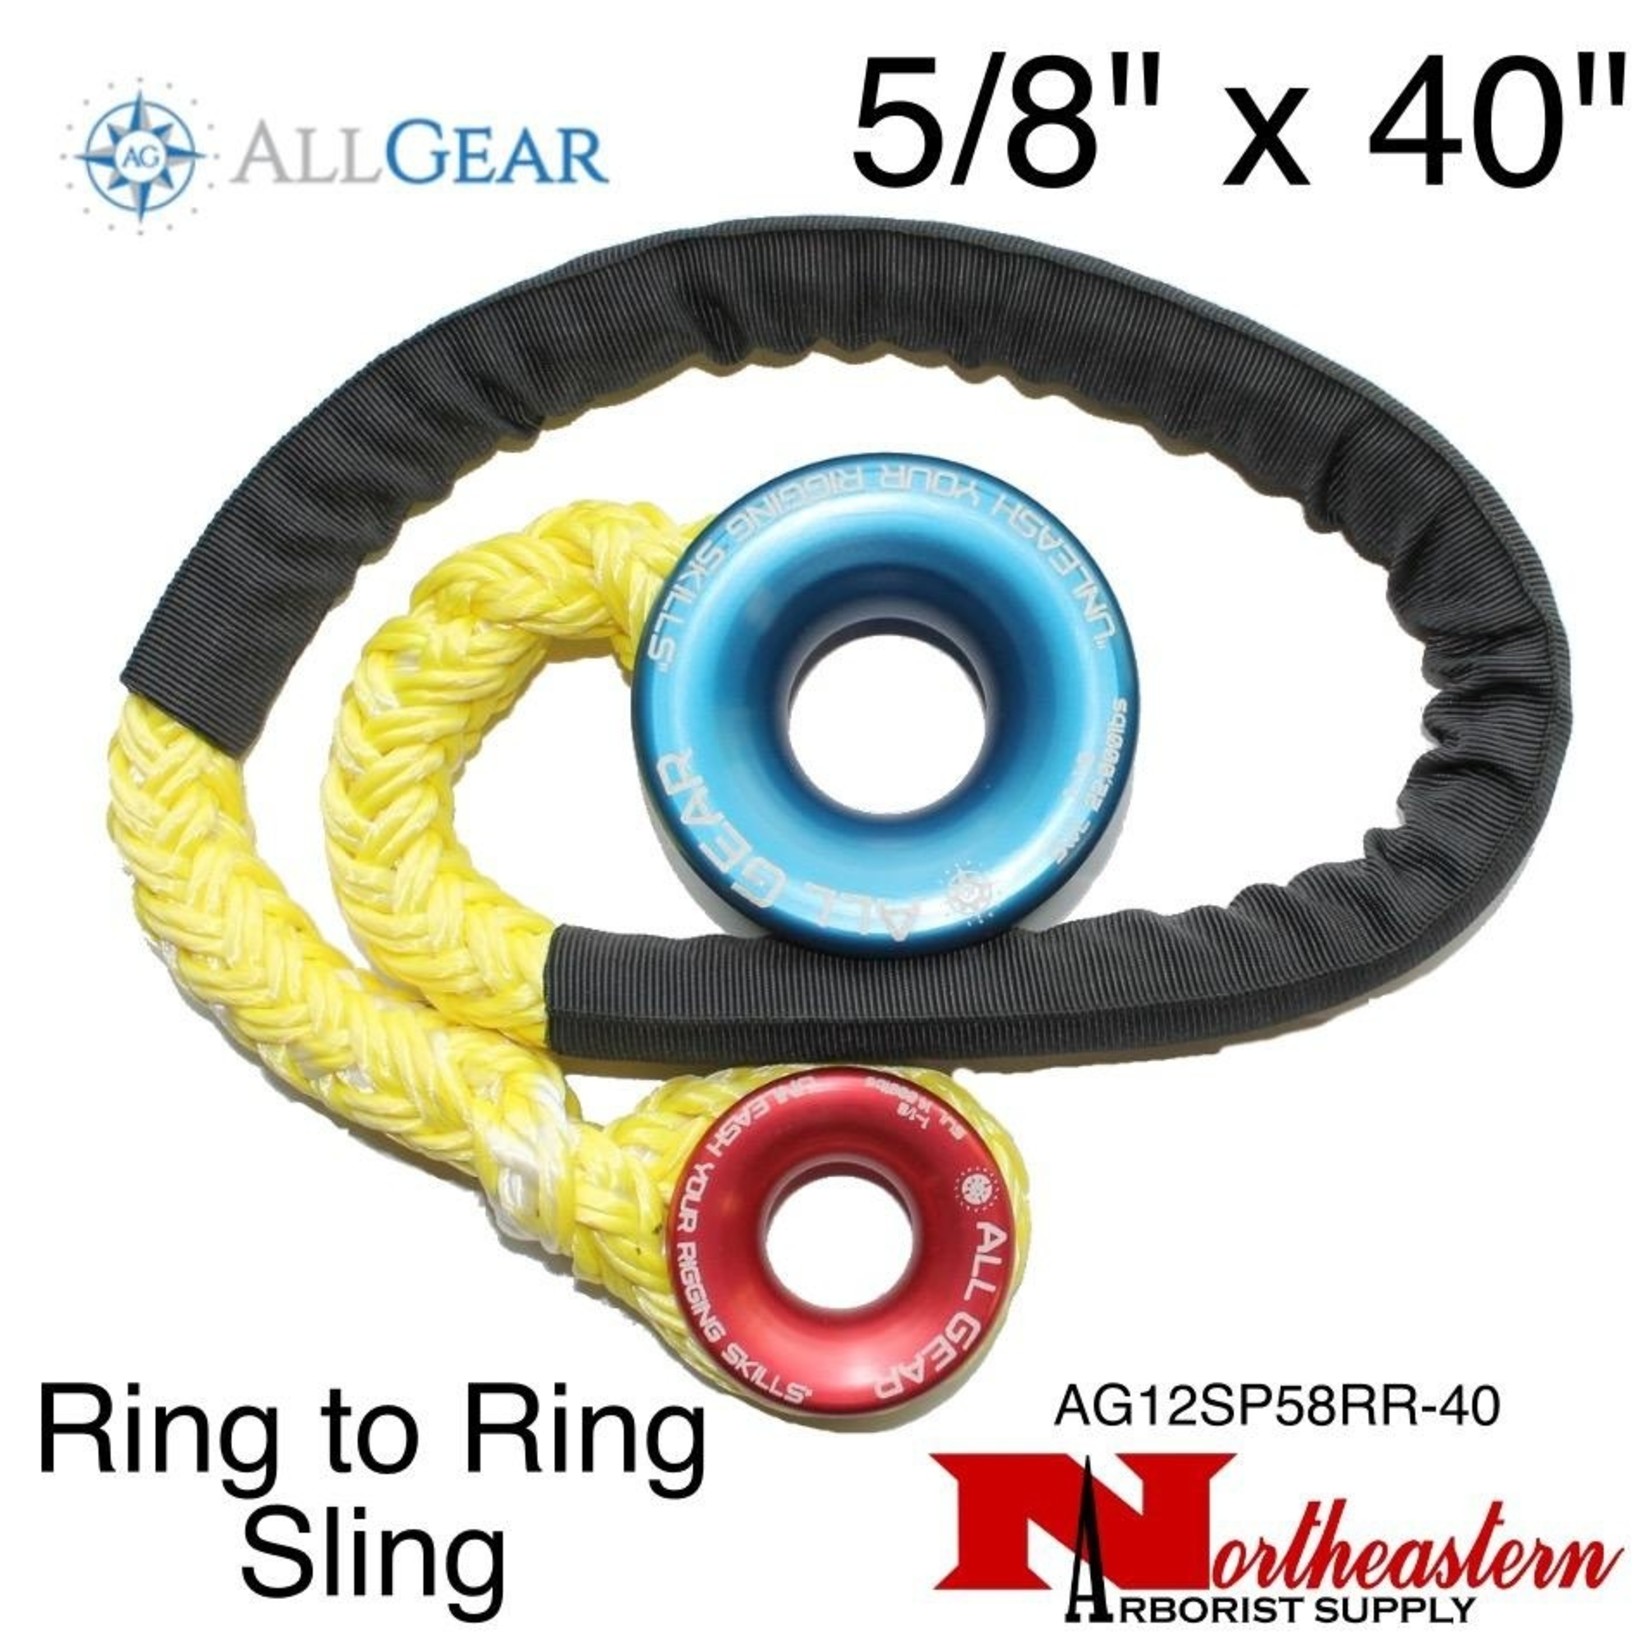 All Gear Inc. Ring To Ring Sling 5/8" x 40", 16,000# ABS